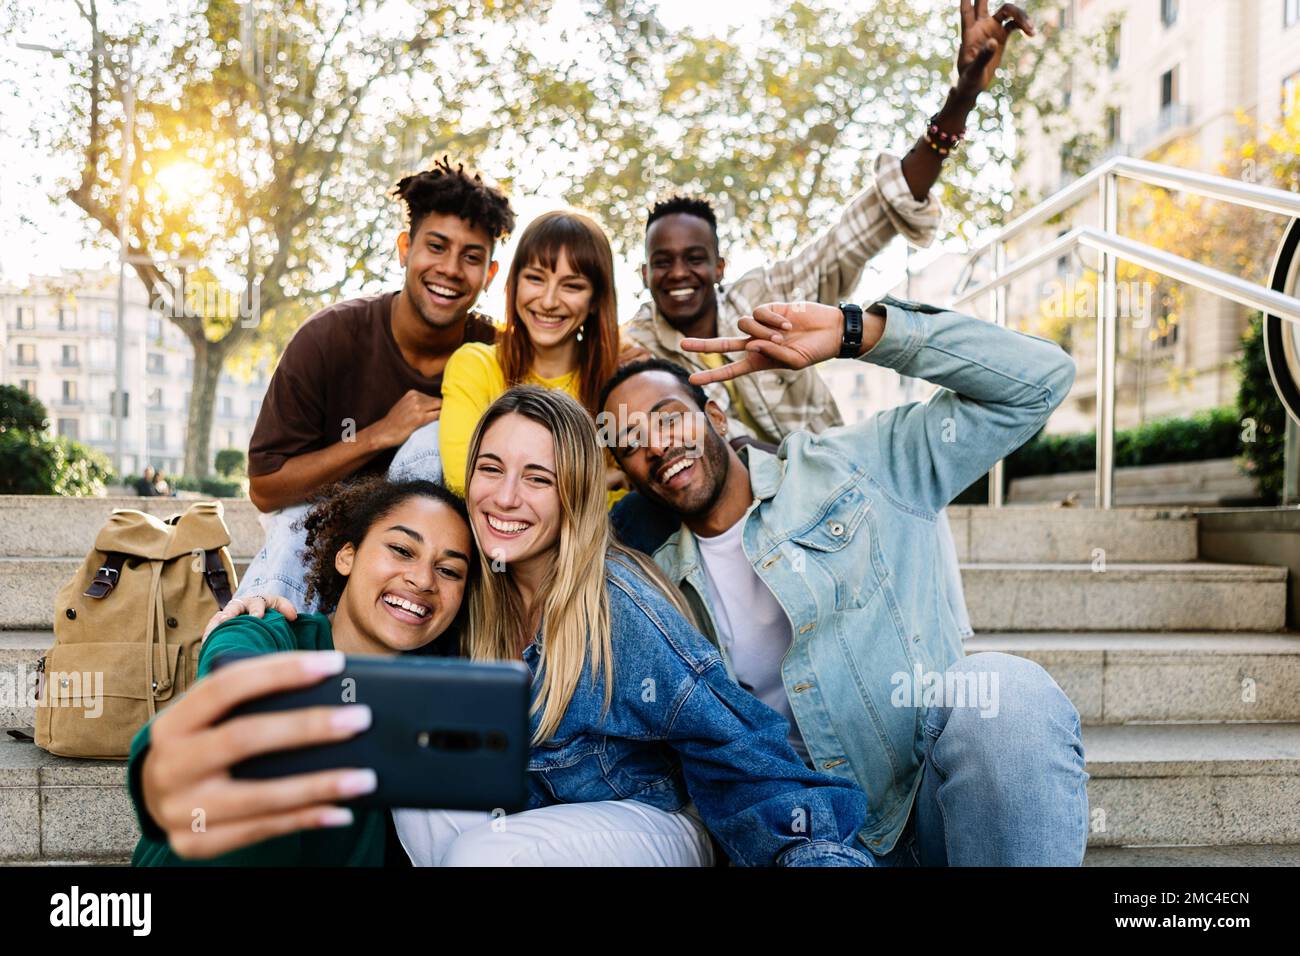 Multiracial young group of student friends taking selfie with phone outdoor Stock Photo